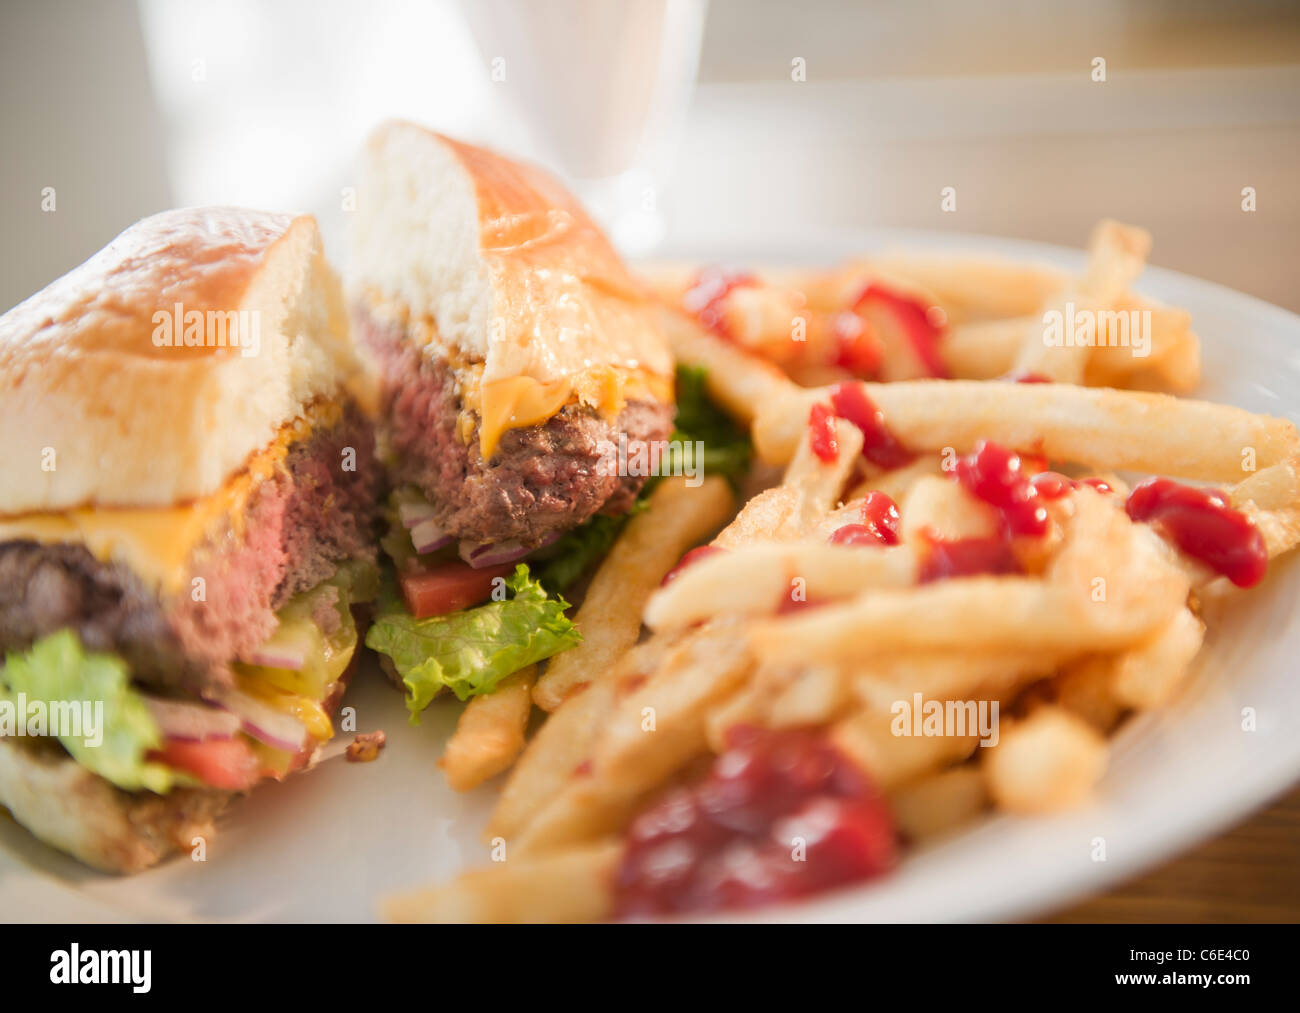 USA, New Jersey, Jersey City, Close up of fast food Banque D'Images